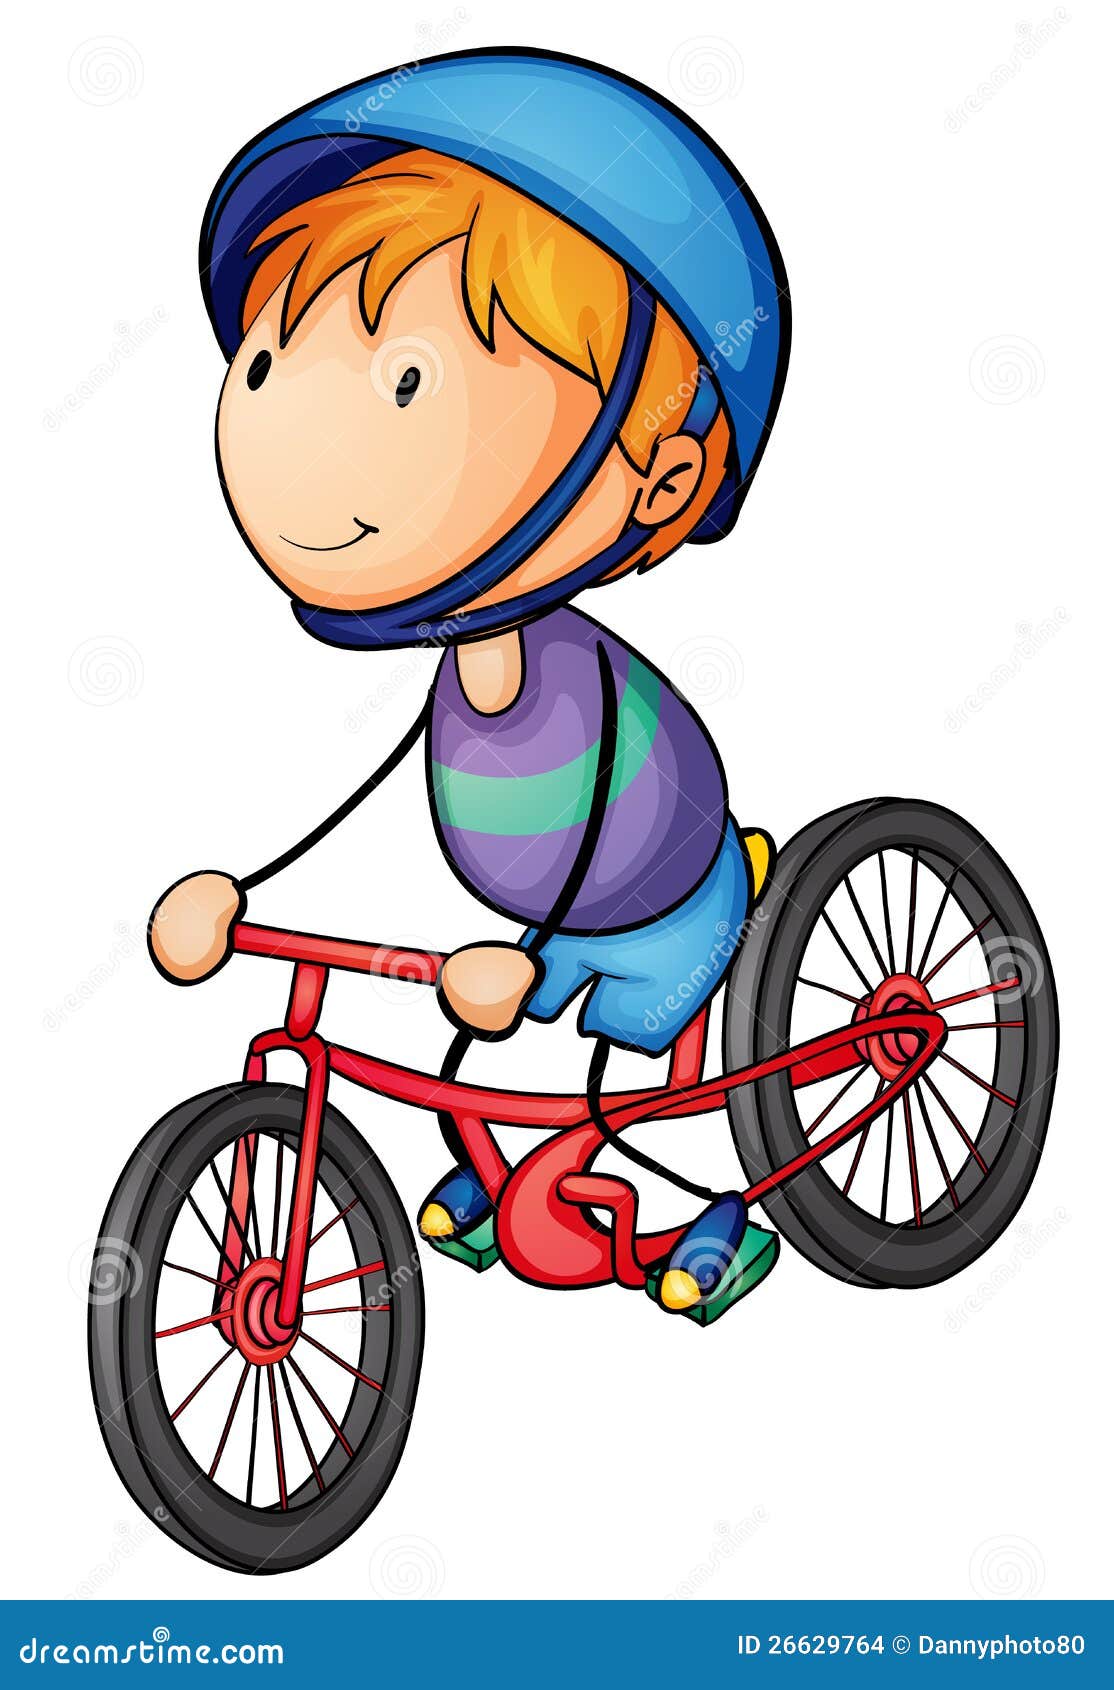 free clip art child riding bicycle - photo #12